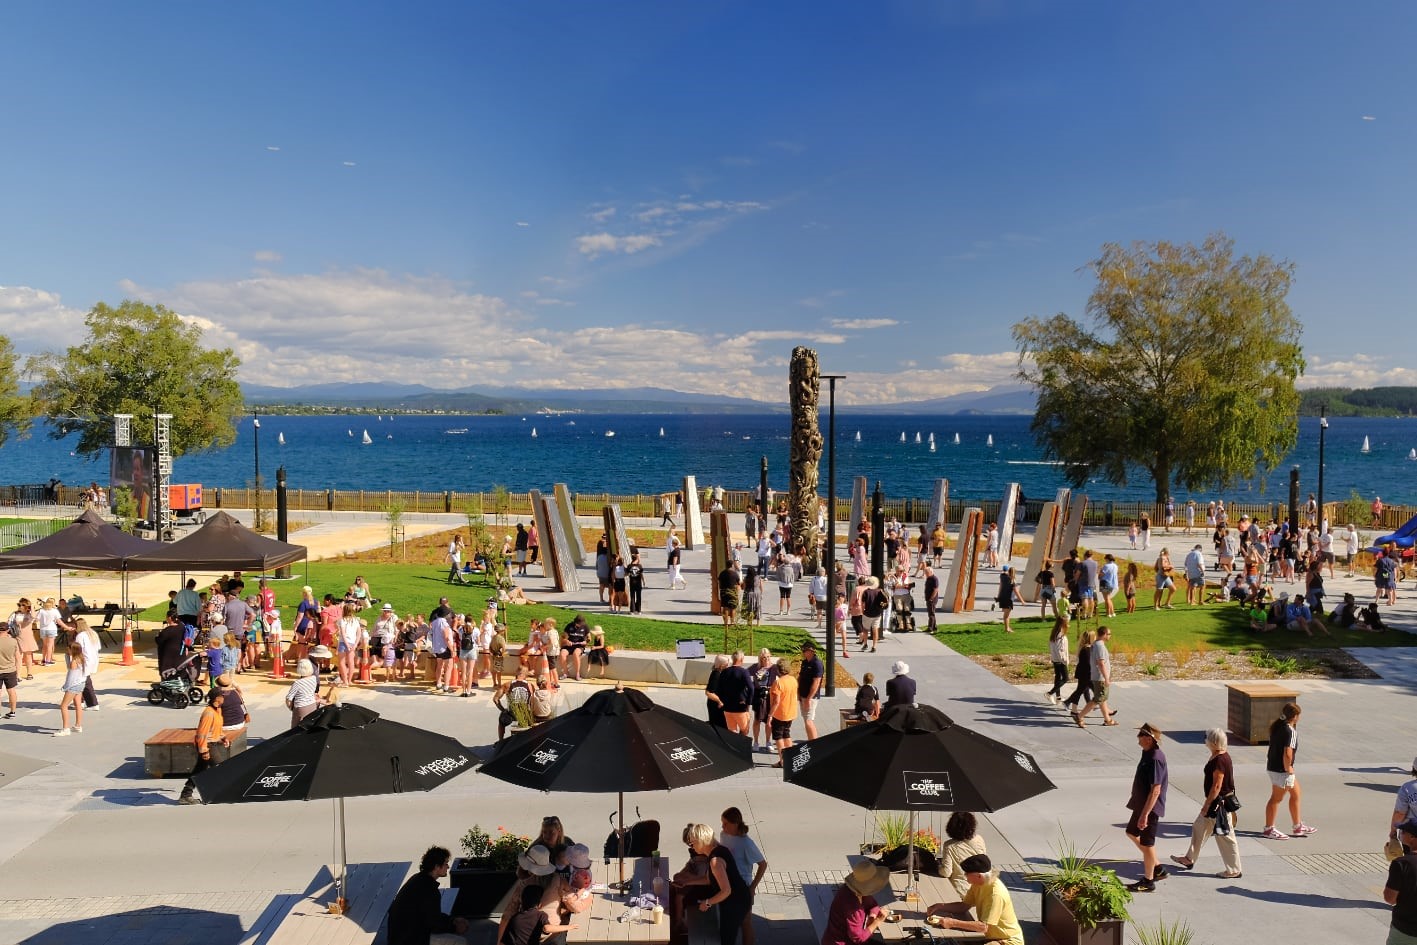 Te Ātea on the Taupō lakefront is a finalist in the Kiwis’ Choice Award.